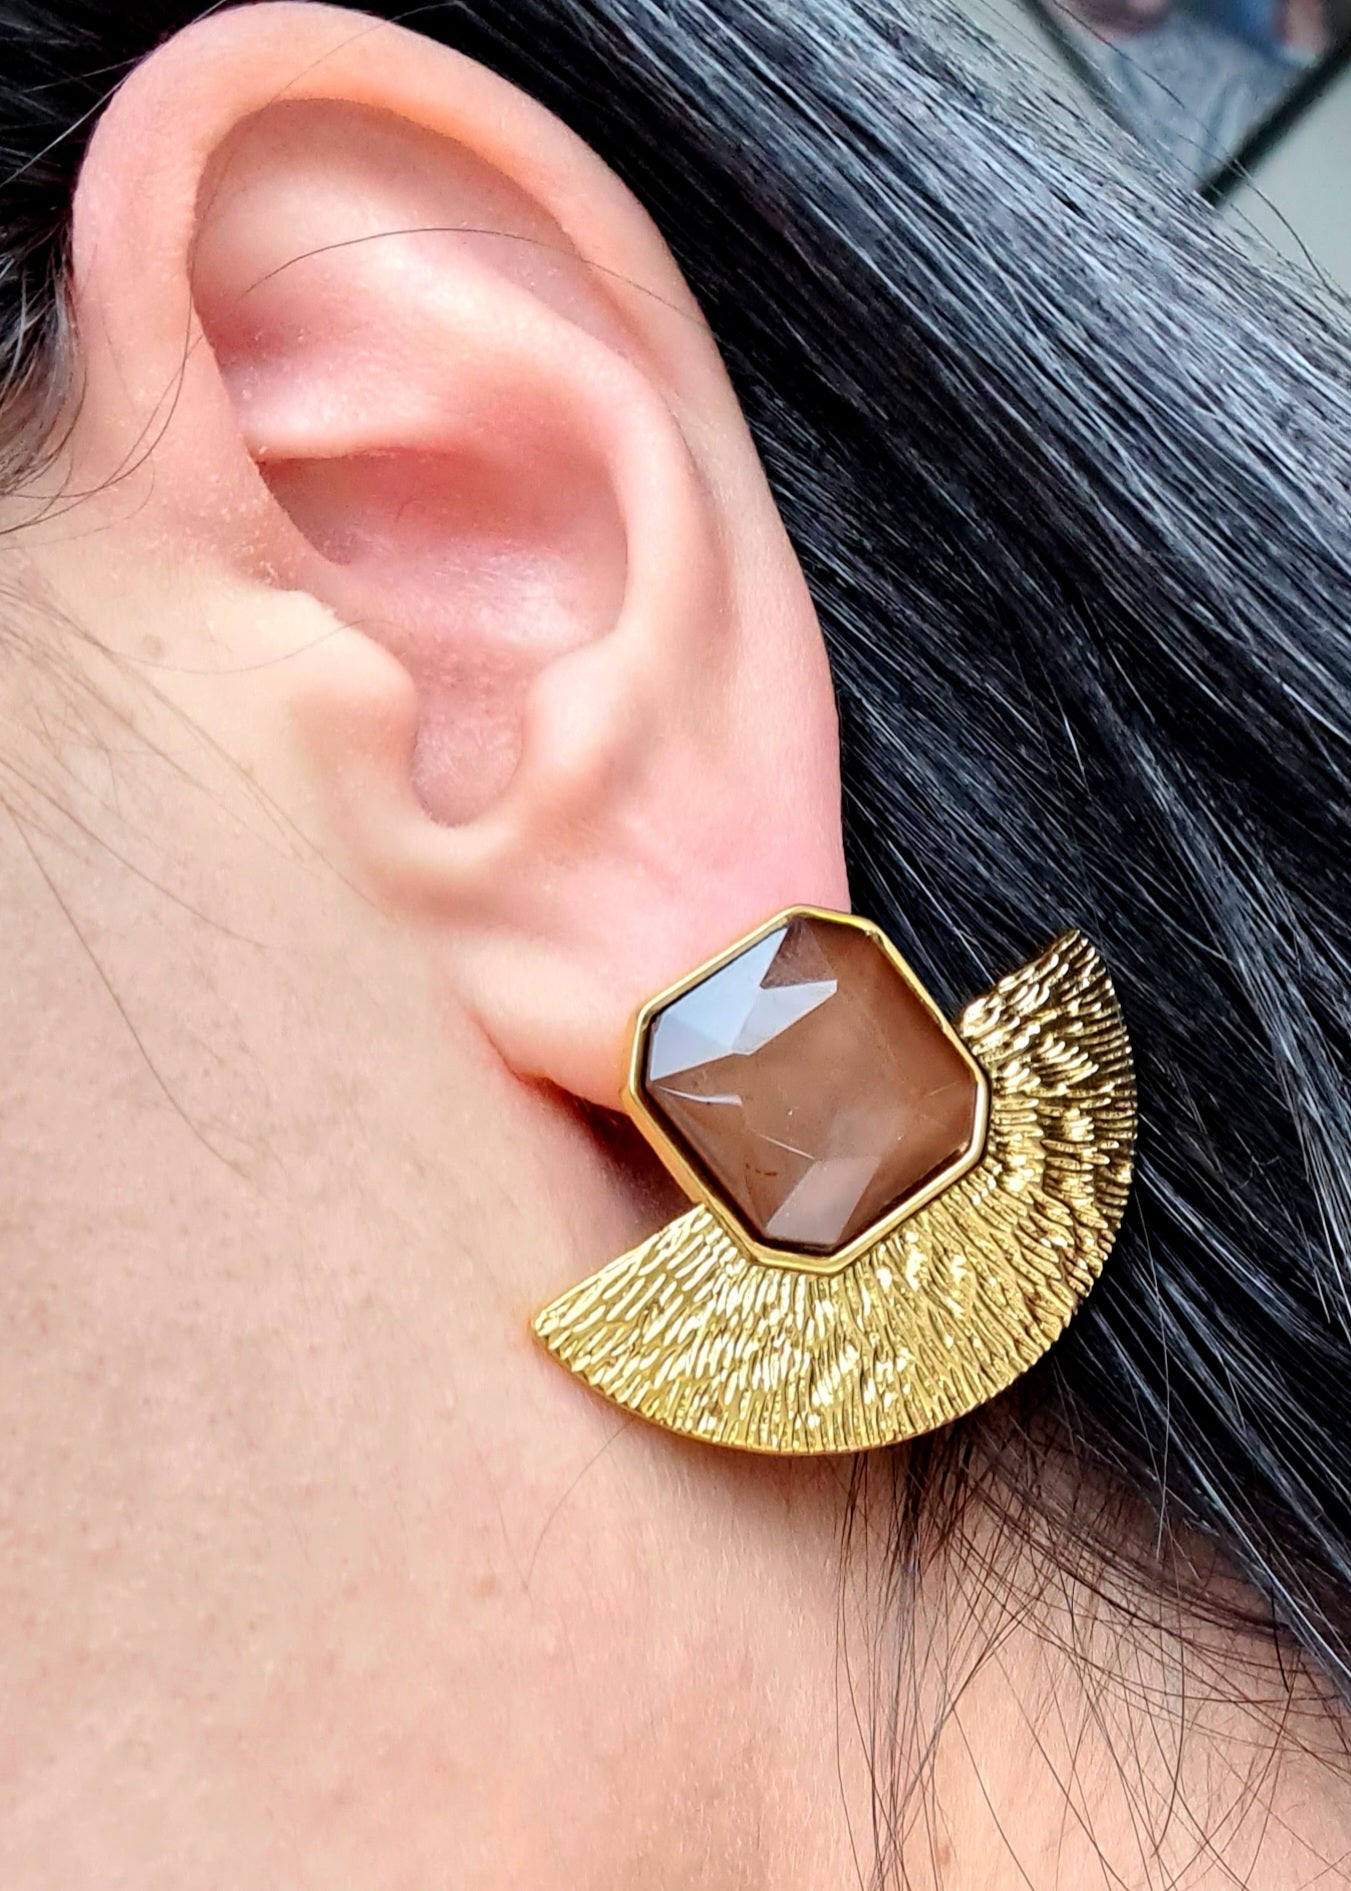 a model wearing A pair of gold earrings with brown stones on a black surface. The earrings are fan-shaped with a delicate design. They are made of gold with brown stones in the center. 